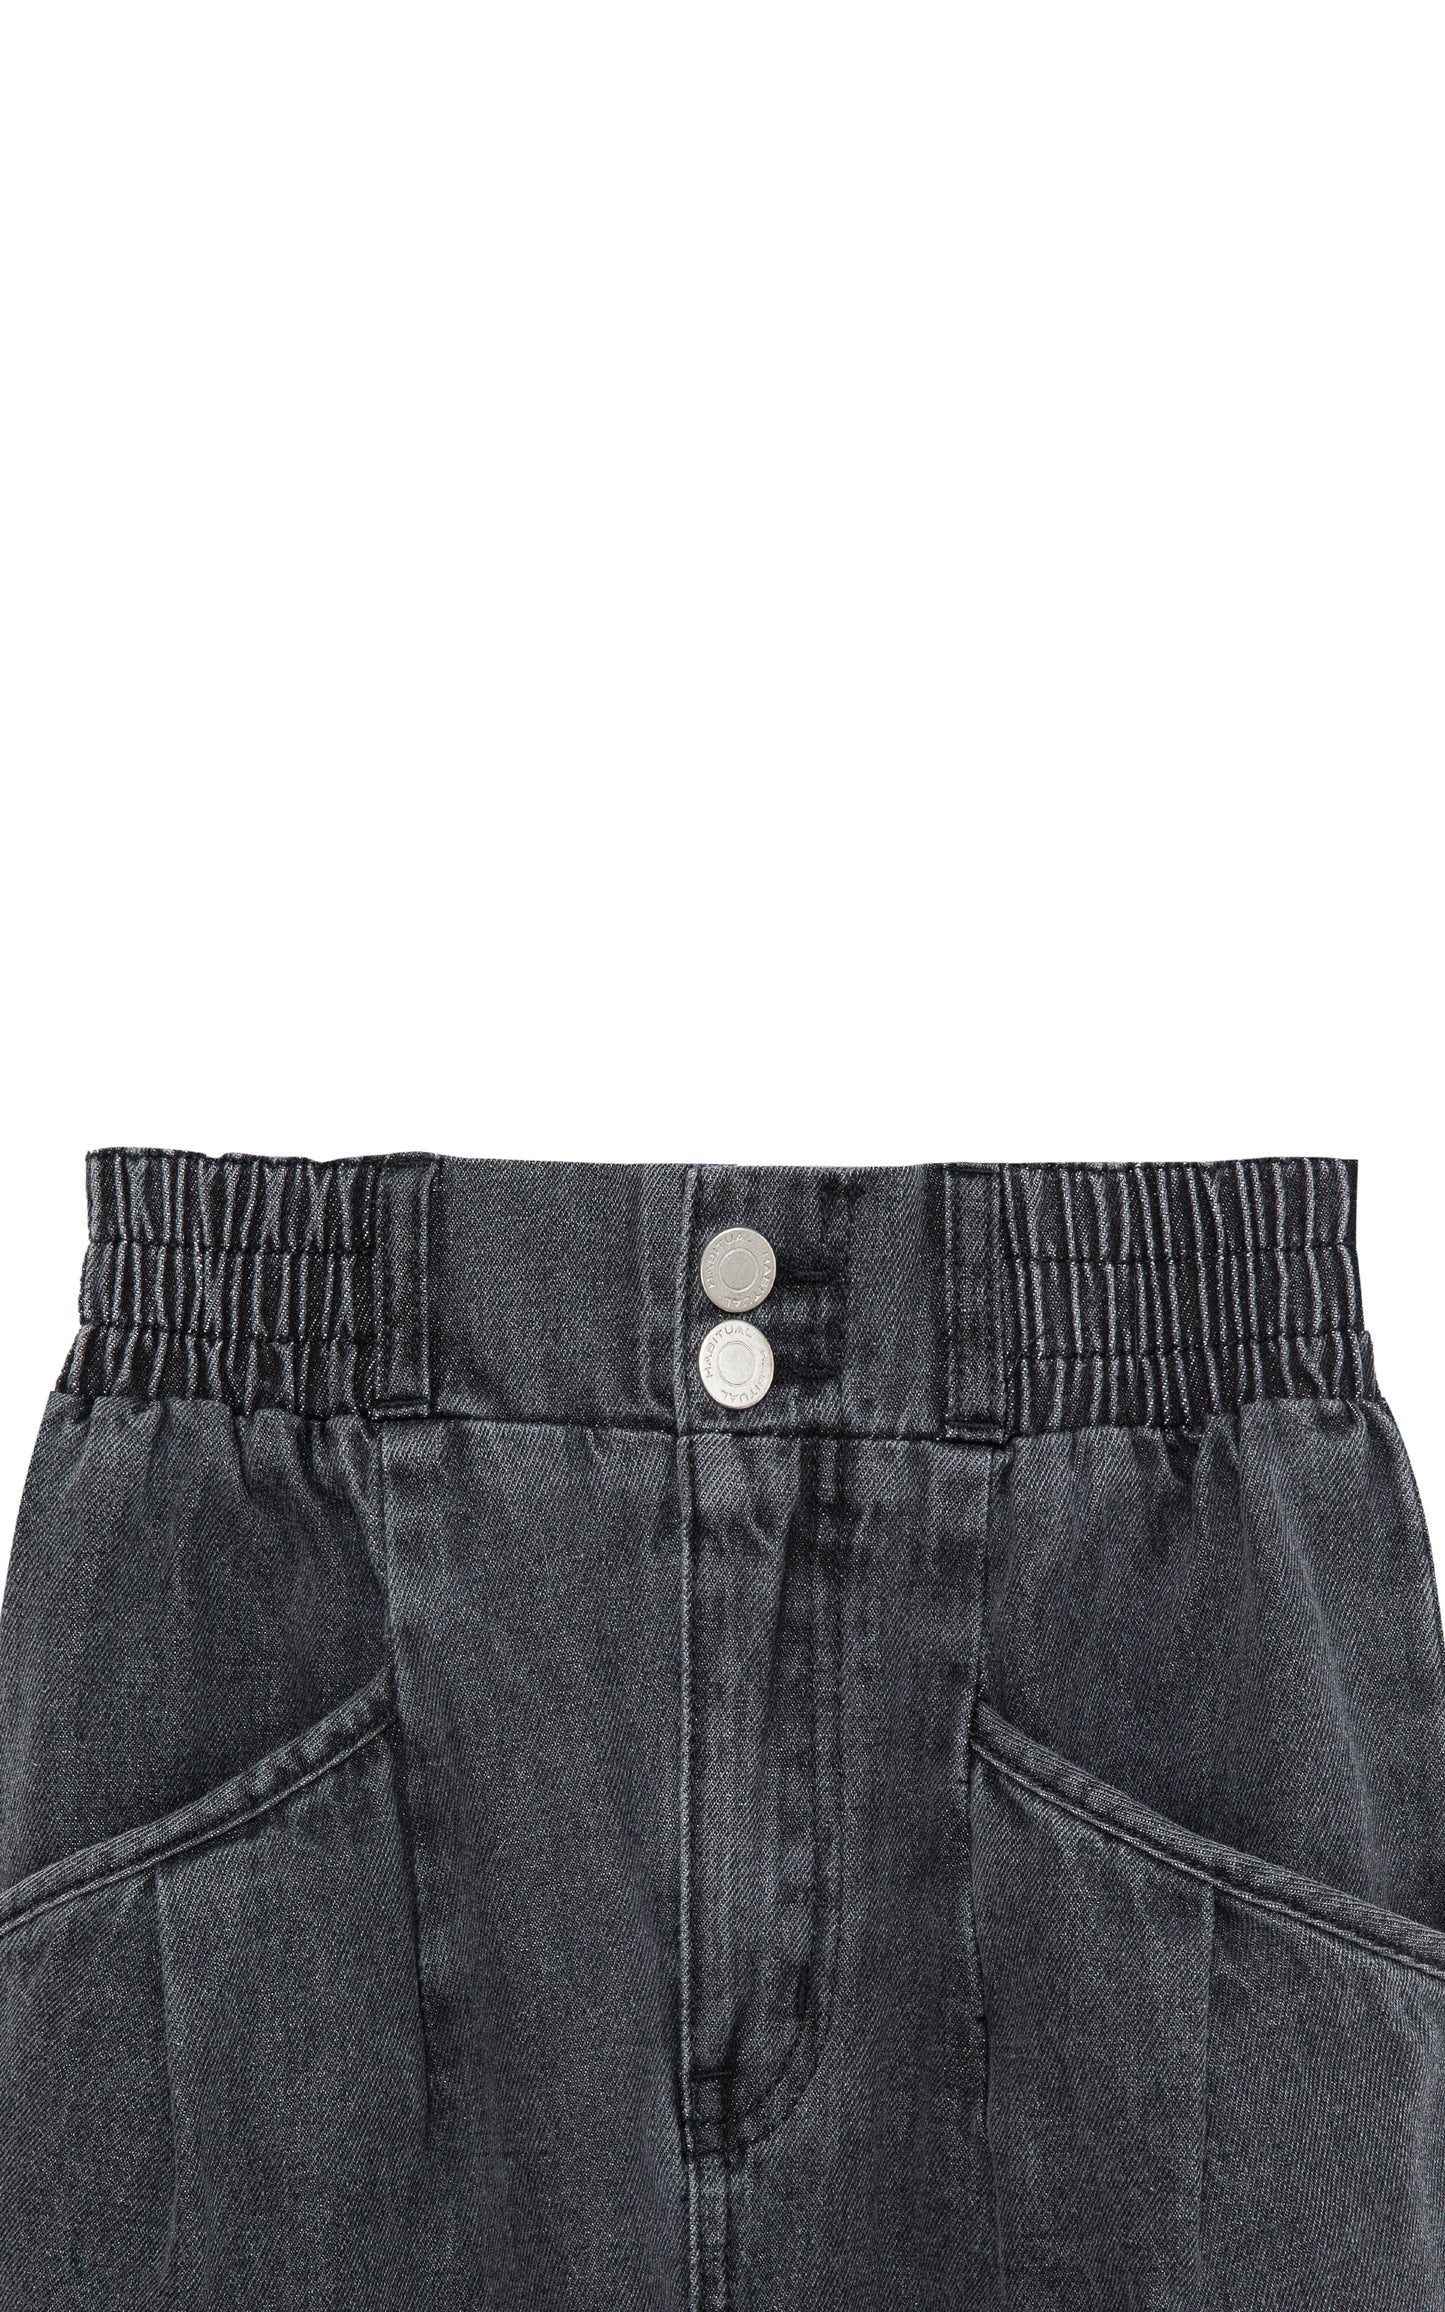 CLOSE UP OF WASHED OUT BLACK DENIM PANTS WITH RUCHED ELASTIC WAISTBAND AND CUFFED ANKLES